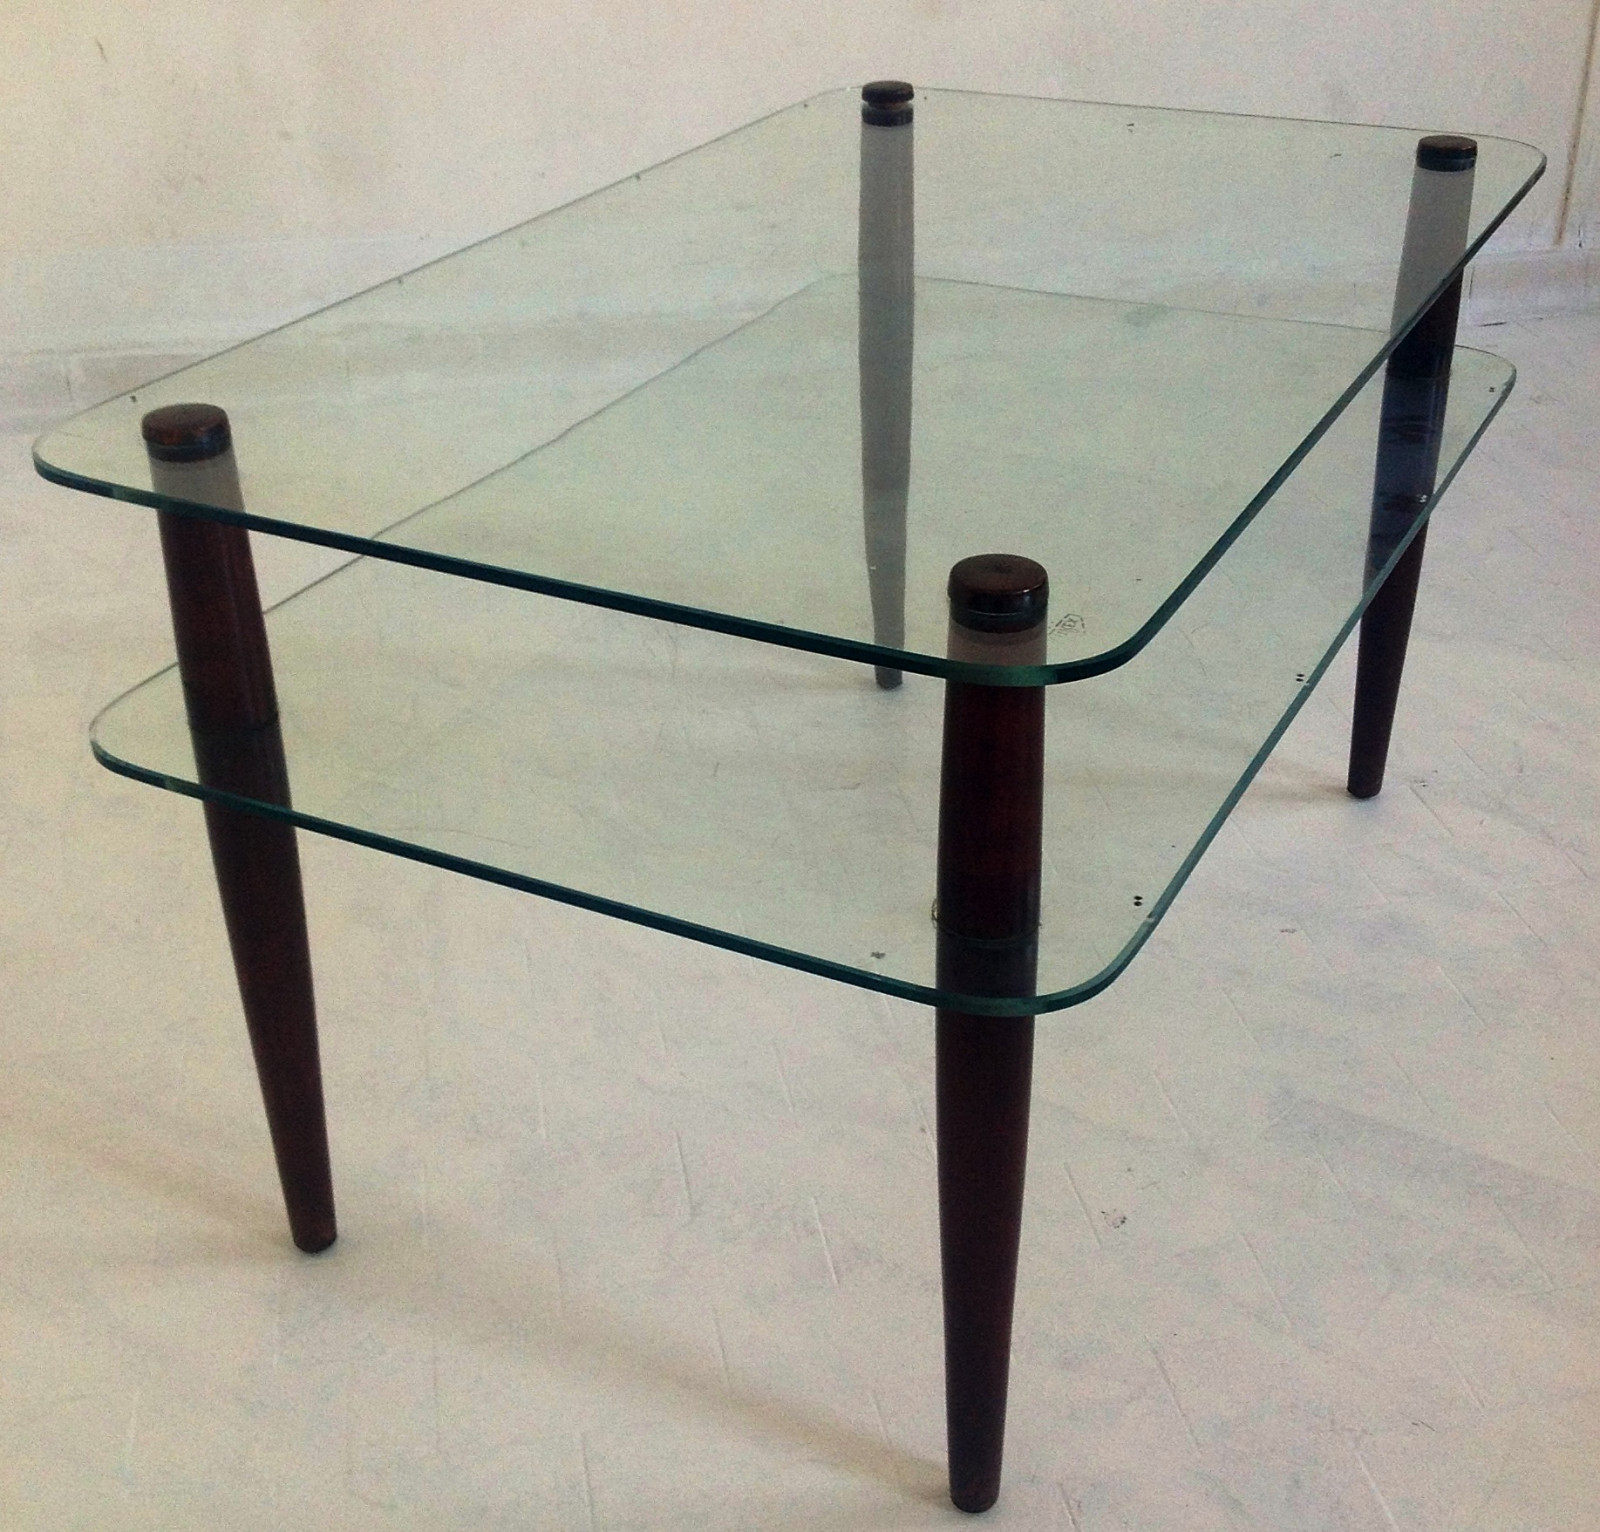 Coffee Table with 2 tempered glass